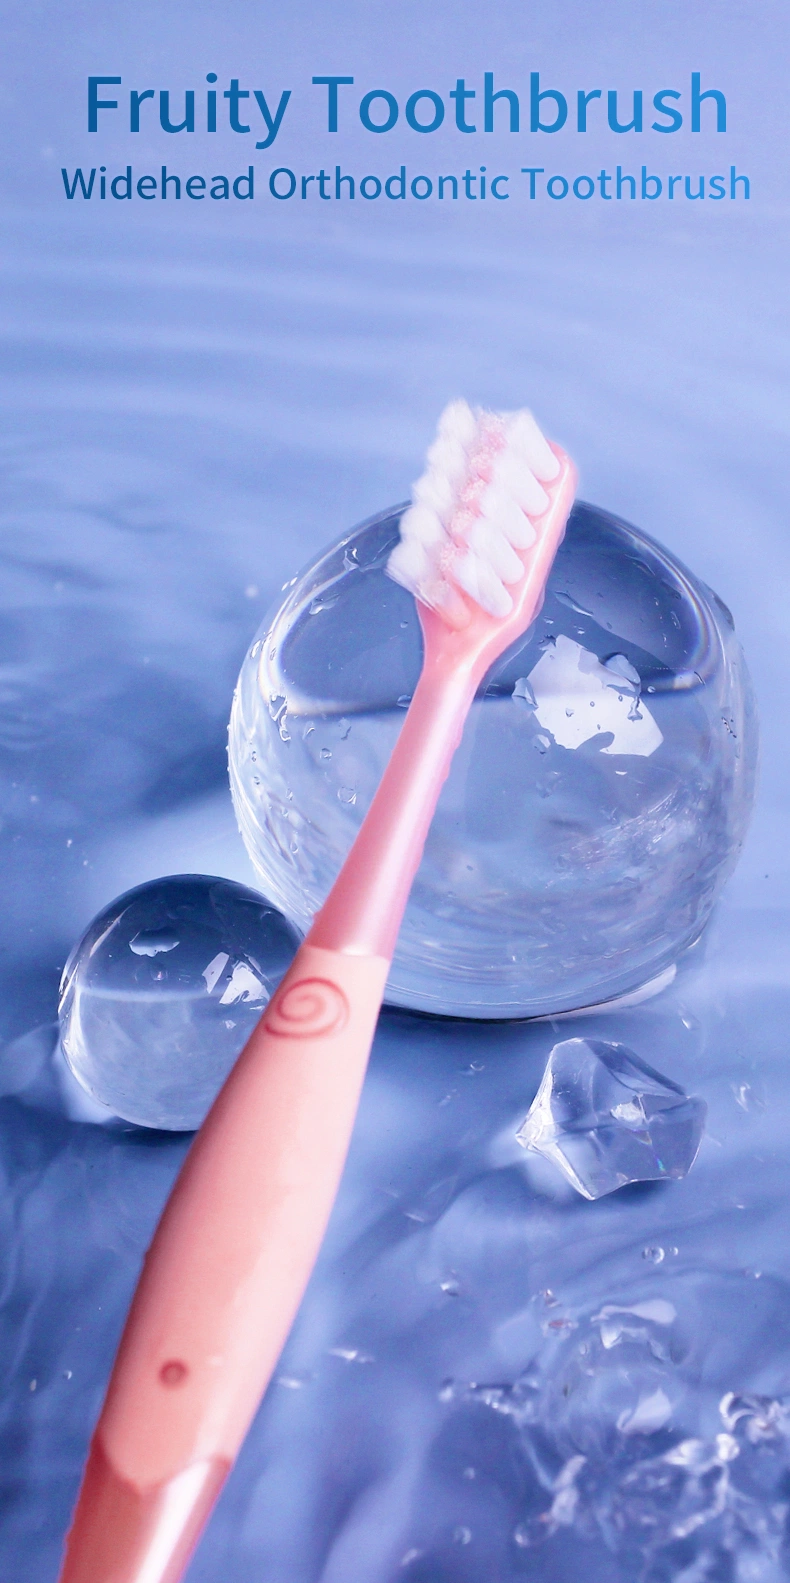 Portable Lollipop Toothbrush with Tongue Scraper V-Shaped Orthodontic Toothbrush